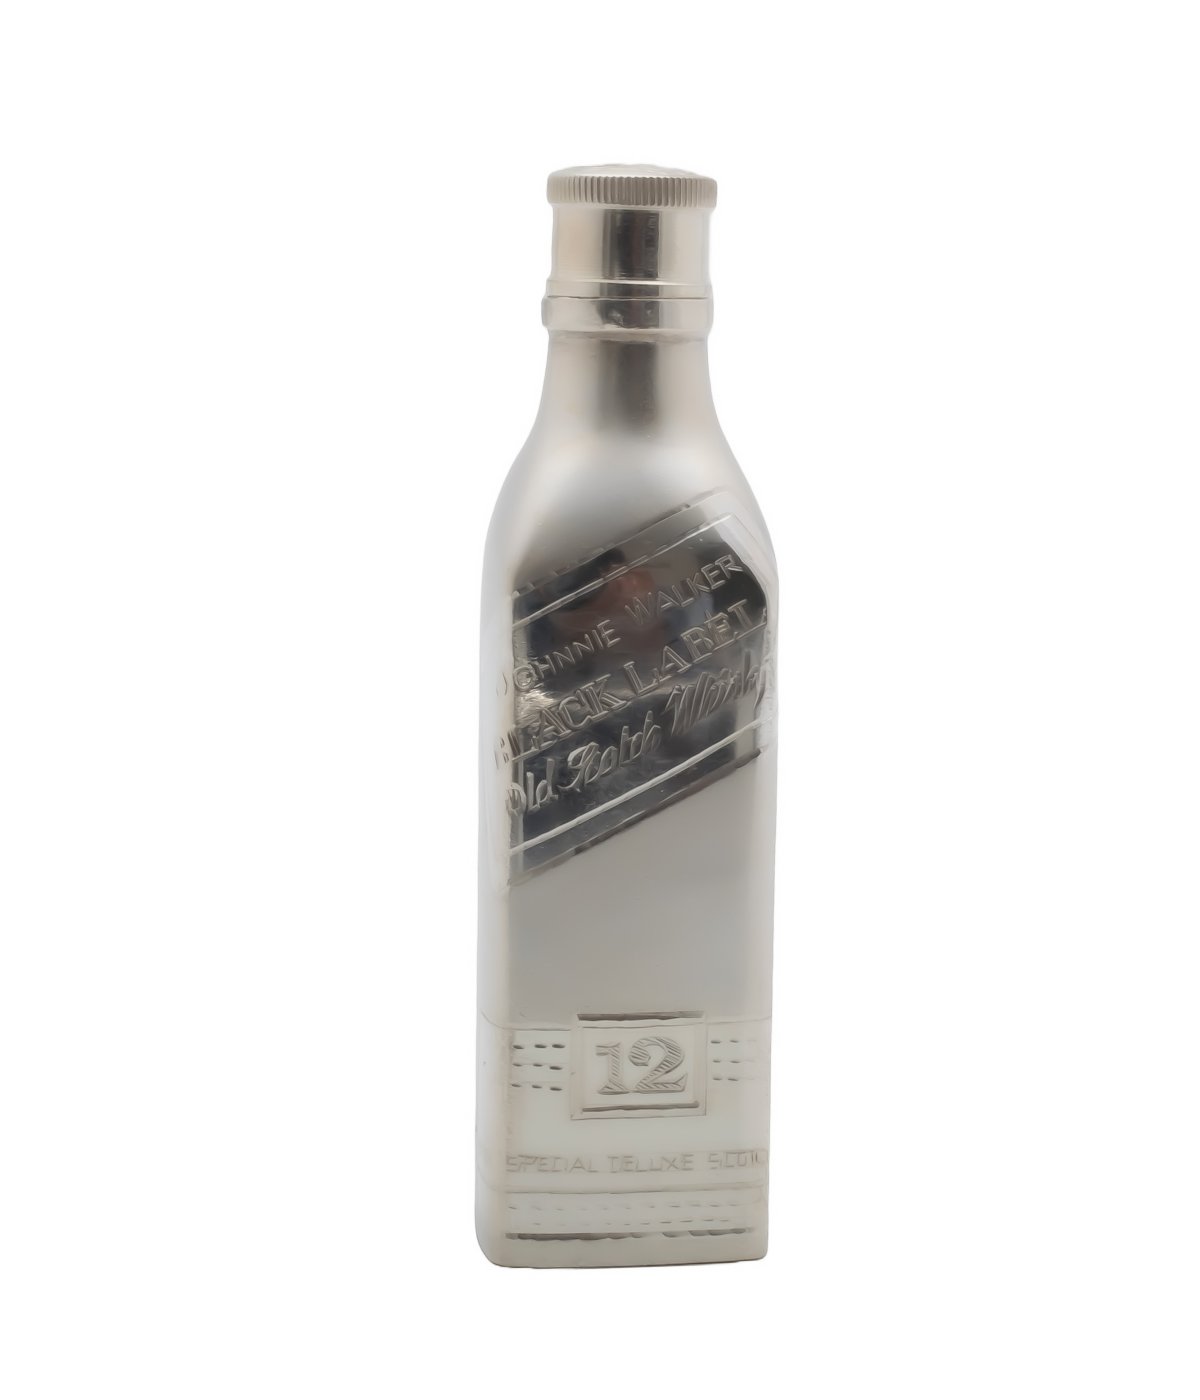 92.5 STERLING SILVER JOHNNIE WALKER BLACK LABEL SCOTCH WHISKY BOTTLE EMPTY FOR THE WHISKY CONNOISEUR